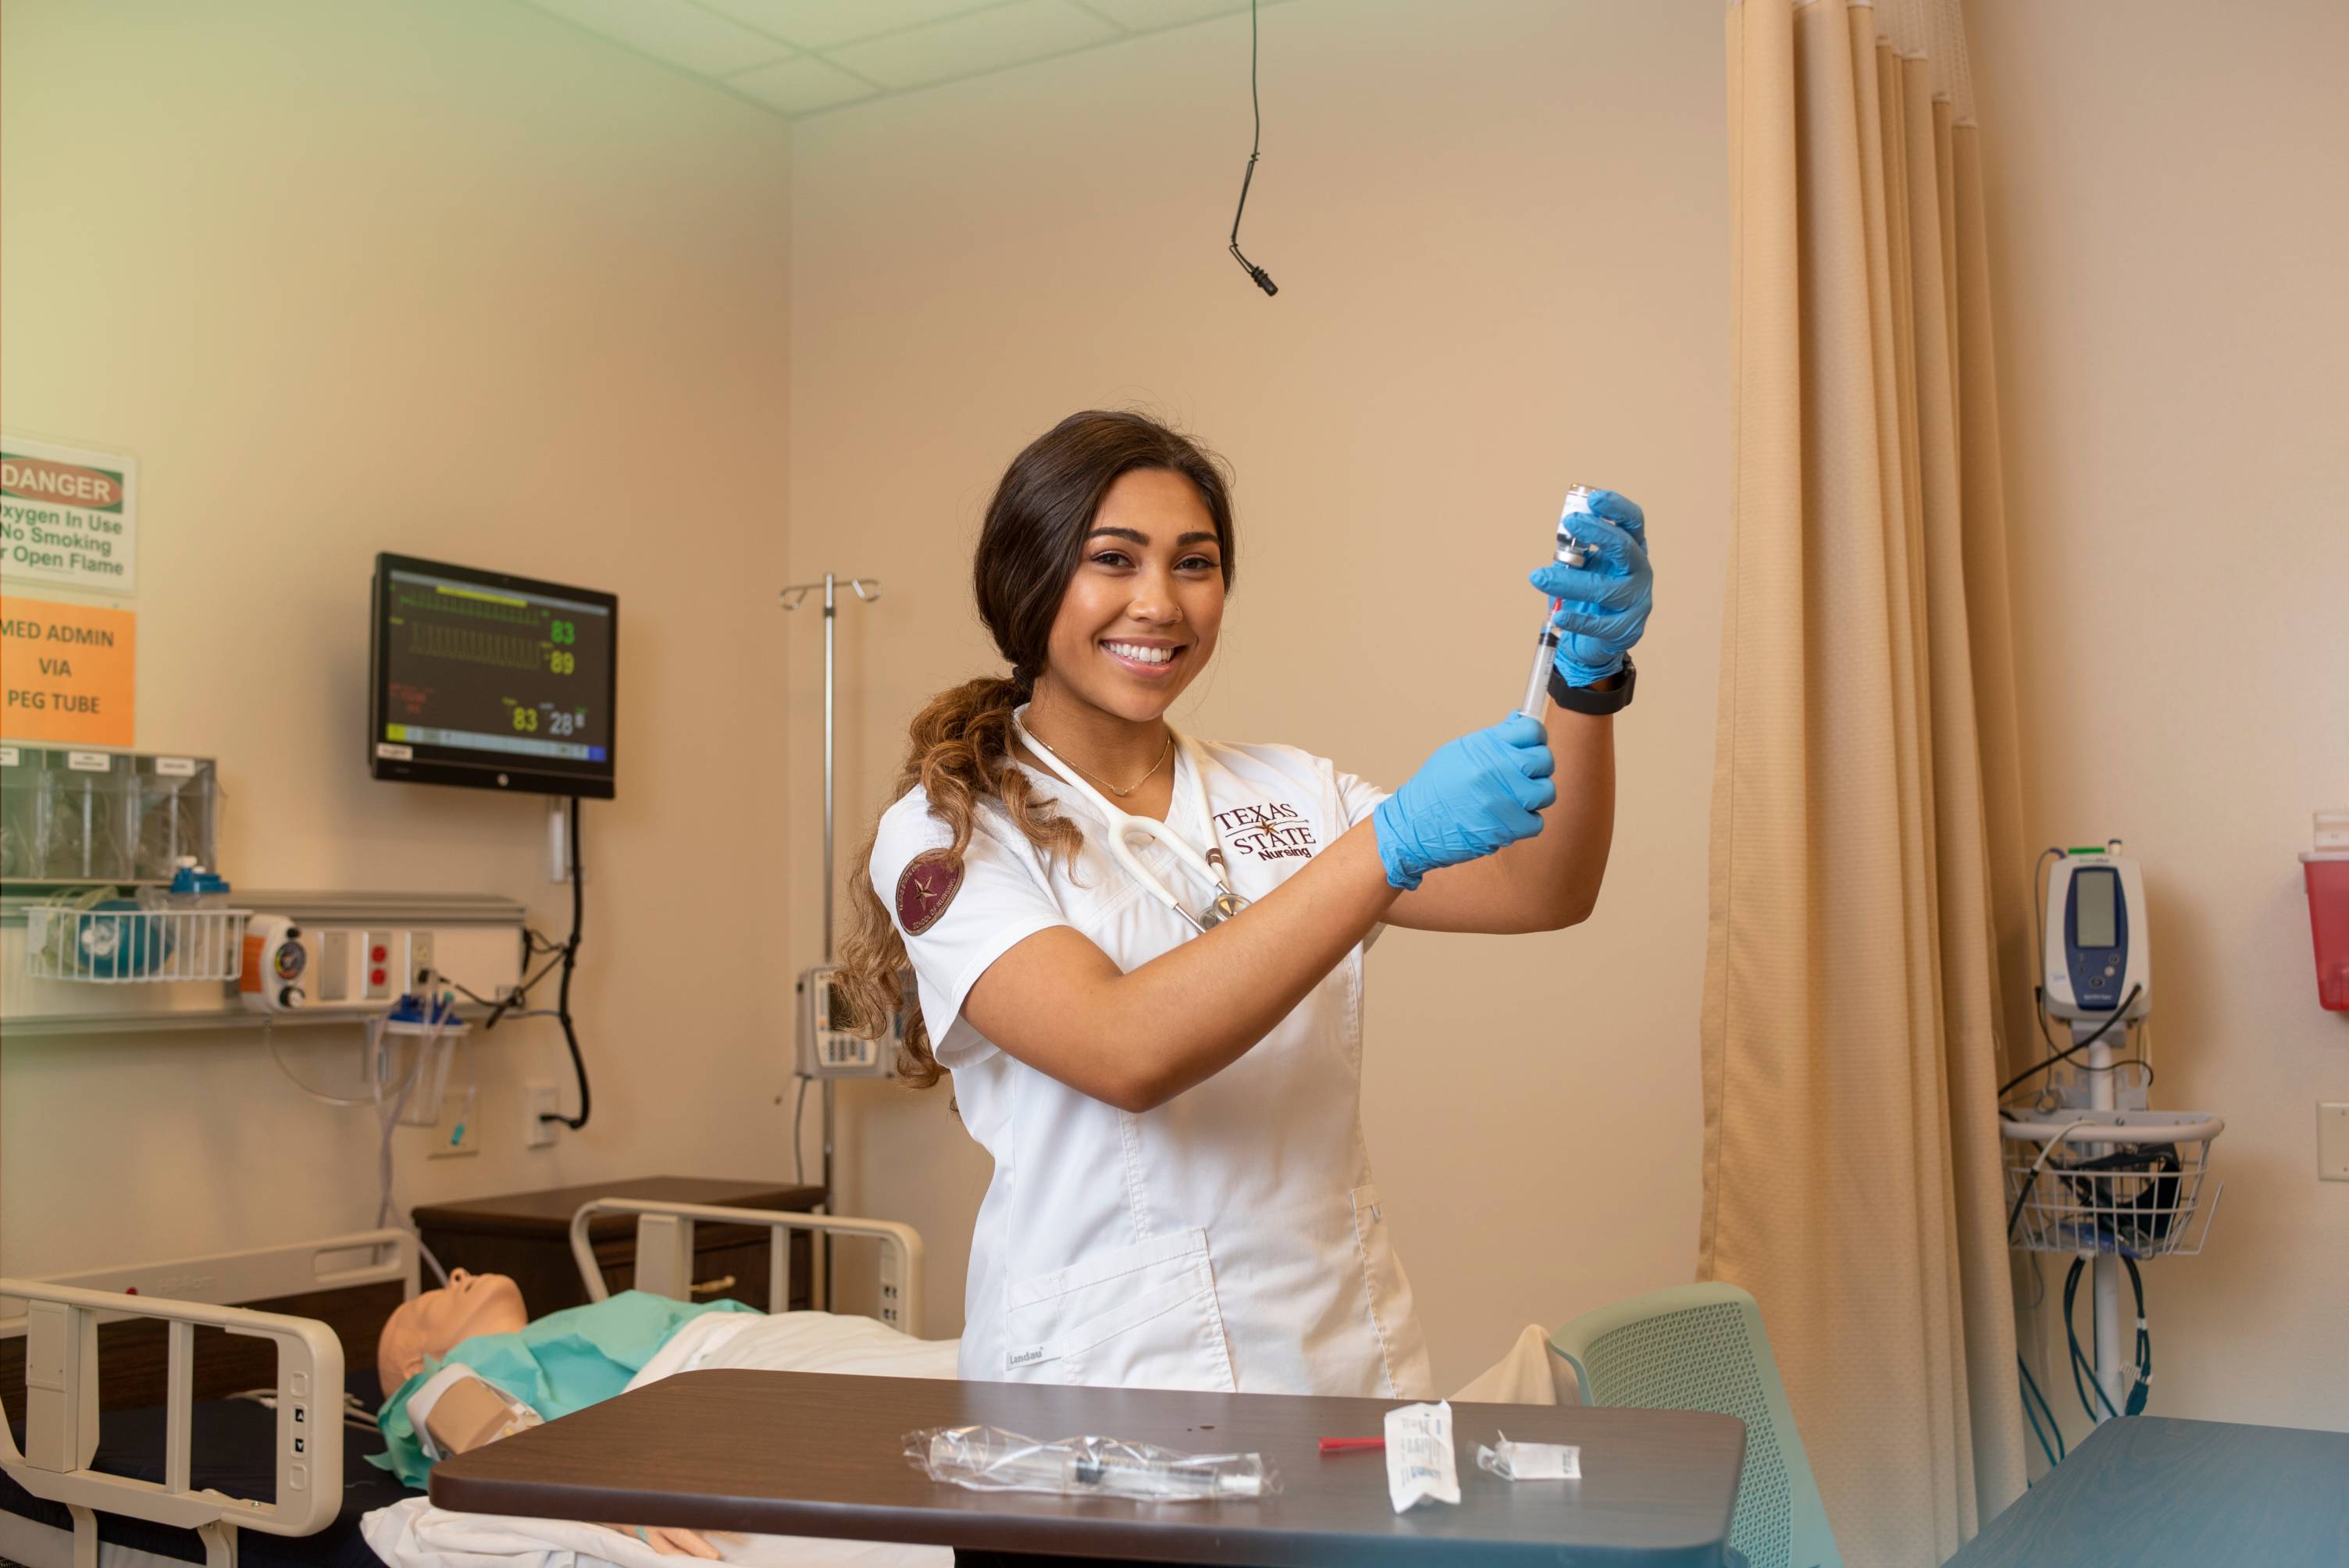 Texas state student in a clinical setting wears scrubs, and blue gloves smiling.